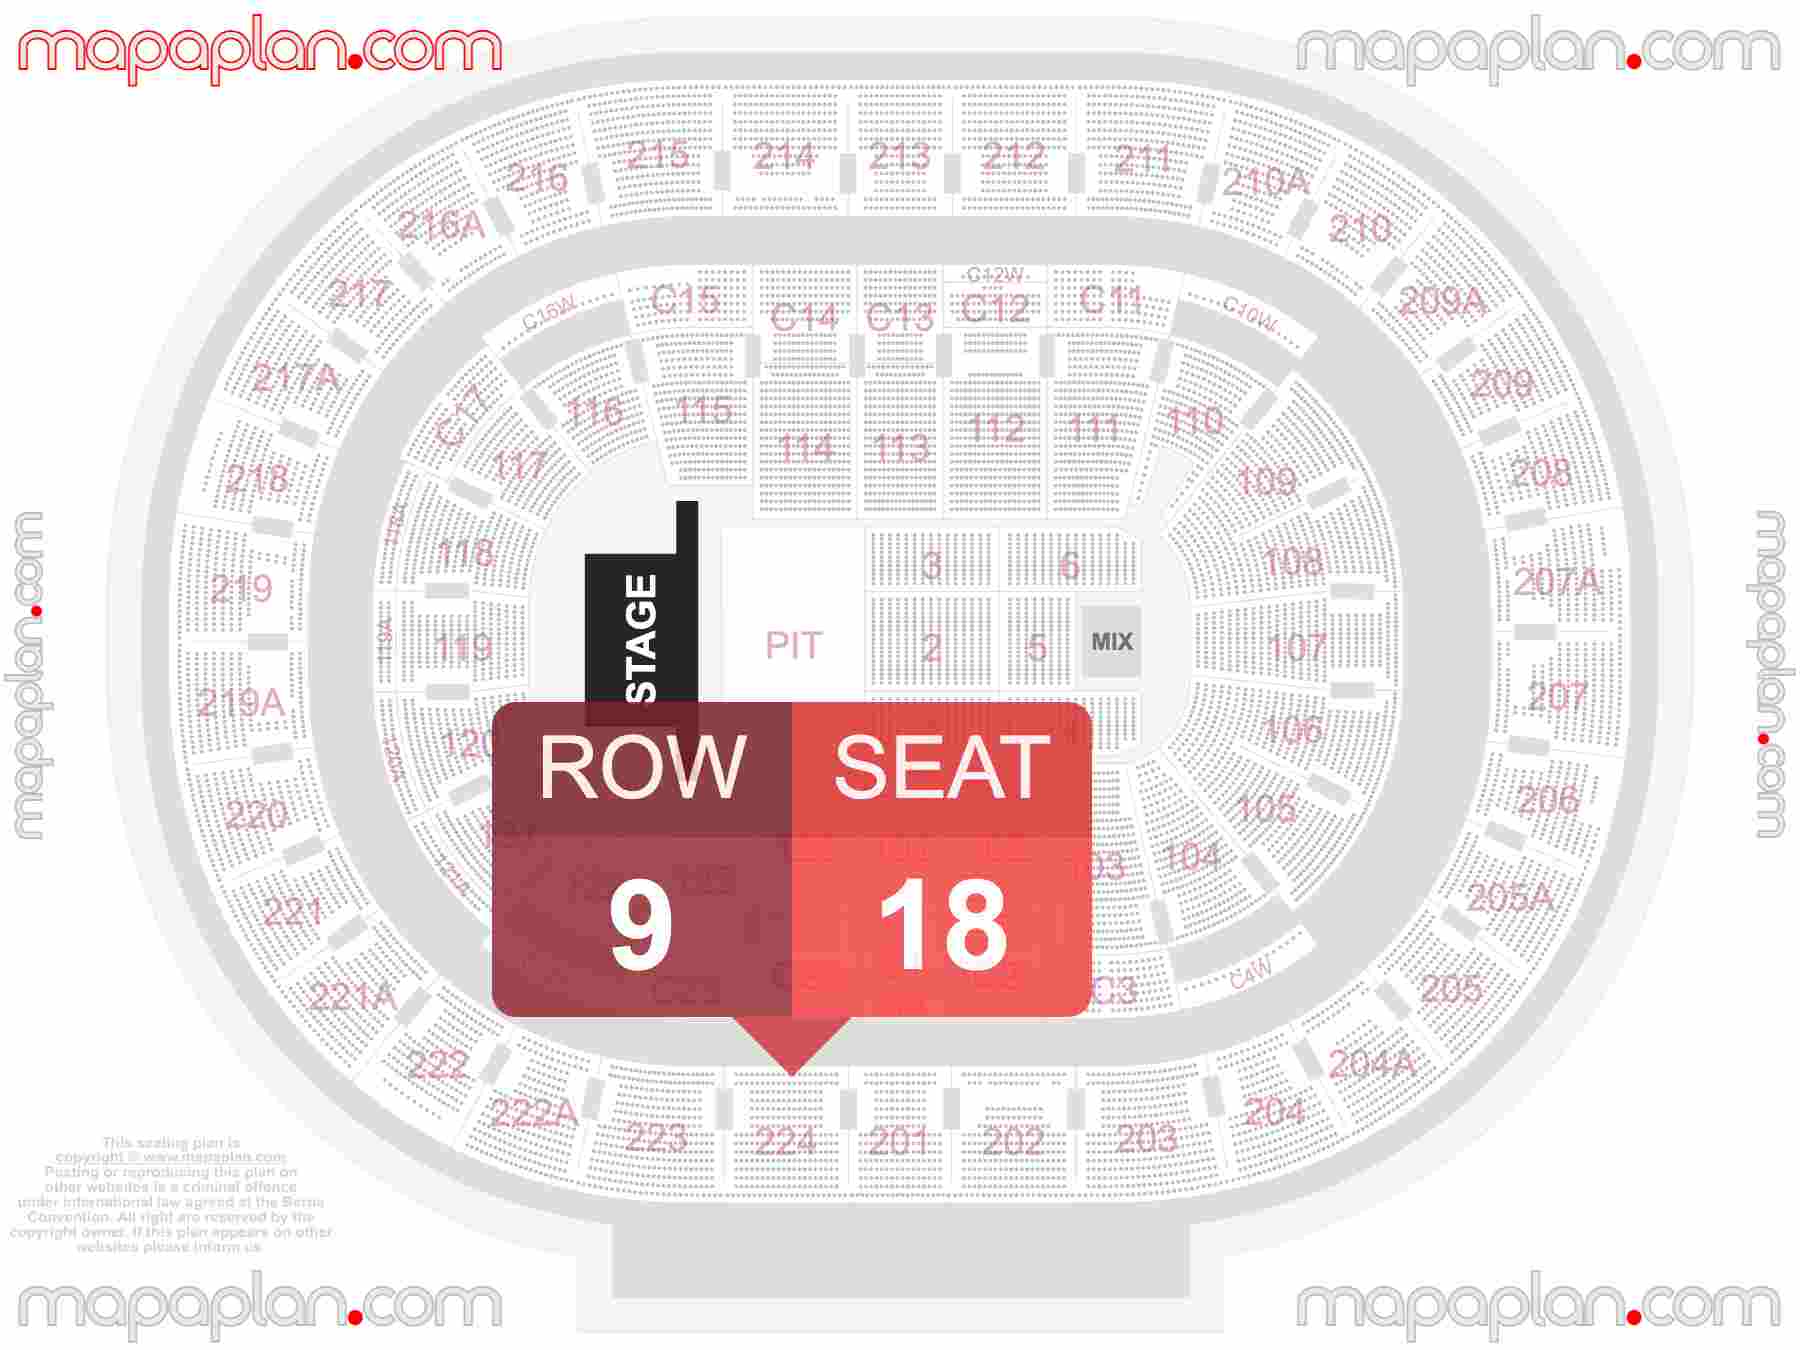 Philadelphia Wells Fargo Center seating chart Concert with PIT floor standing interactive seating checker map plan showing seat numbers per row - Ticket prices sections review diagram